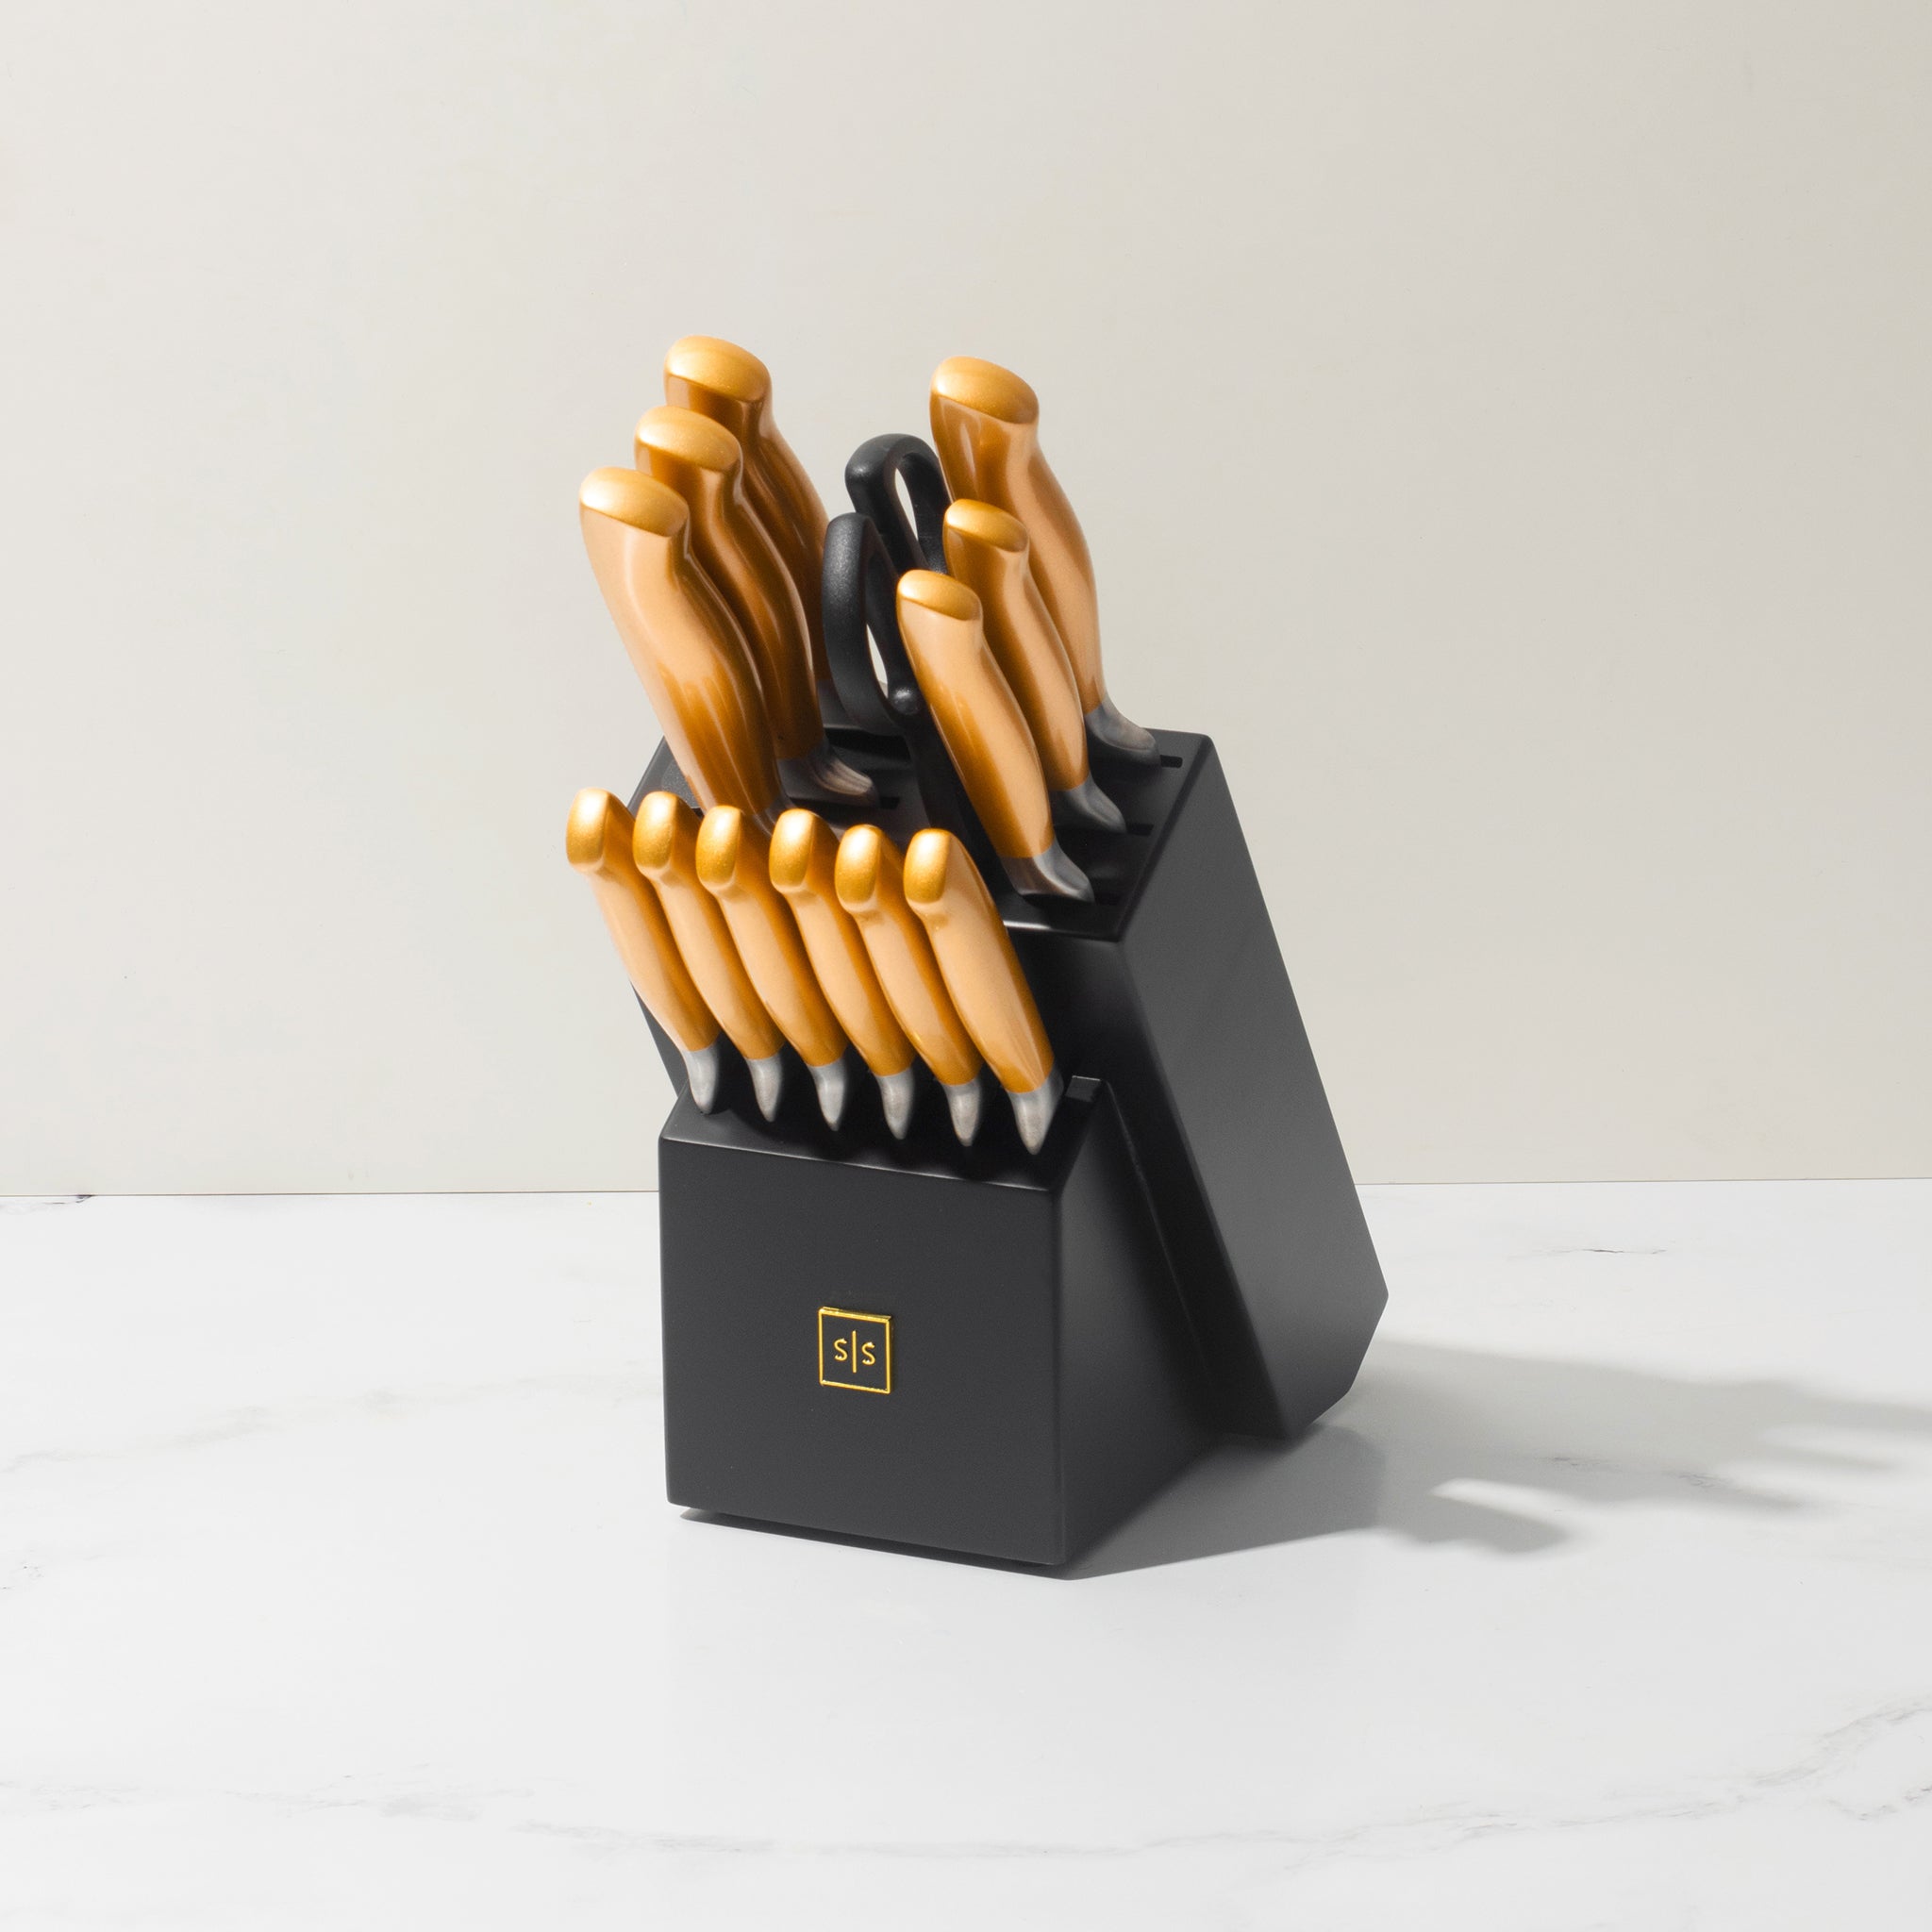  Black and Gold Knife Set with Sharpener- 14 PC Gold